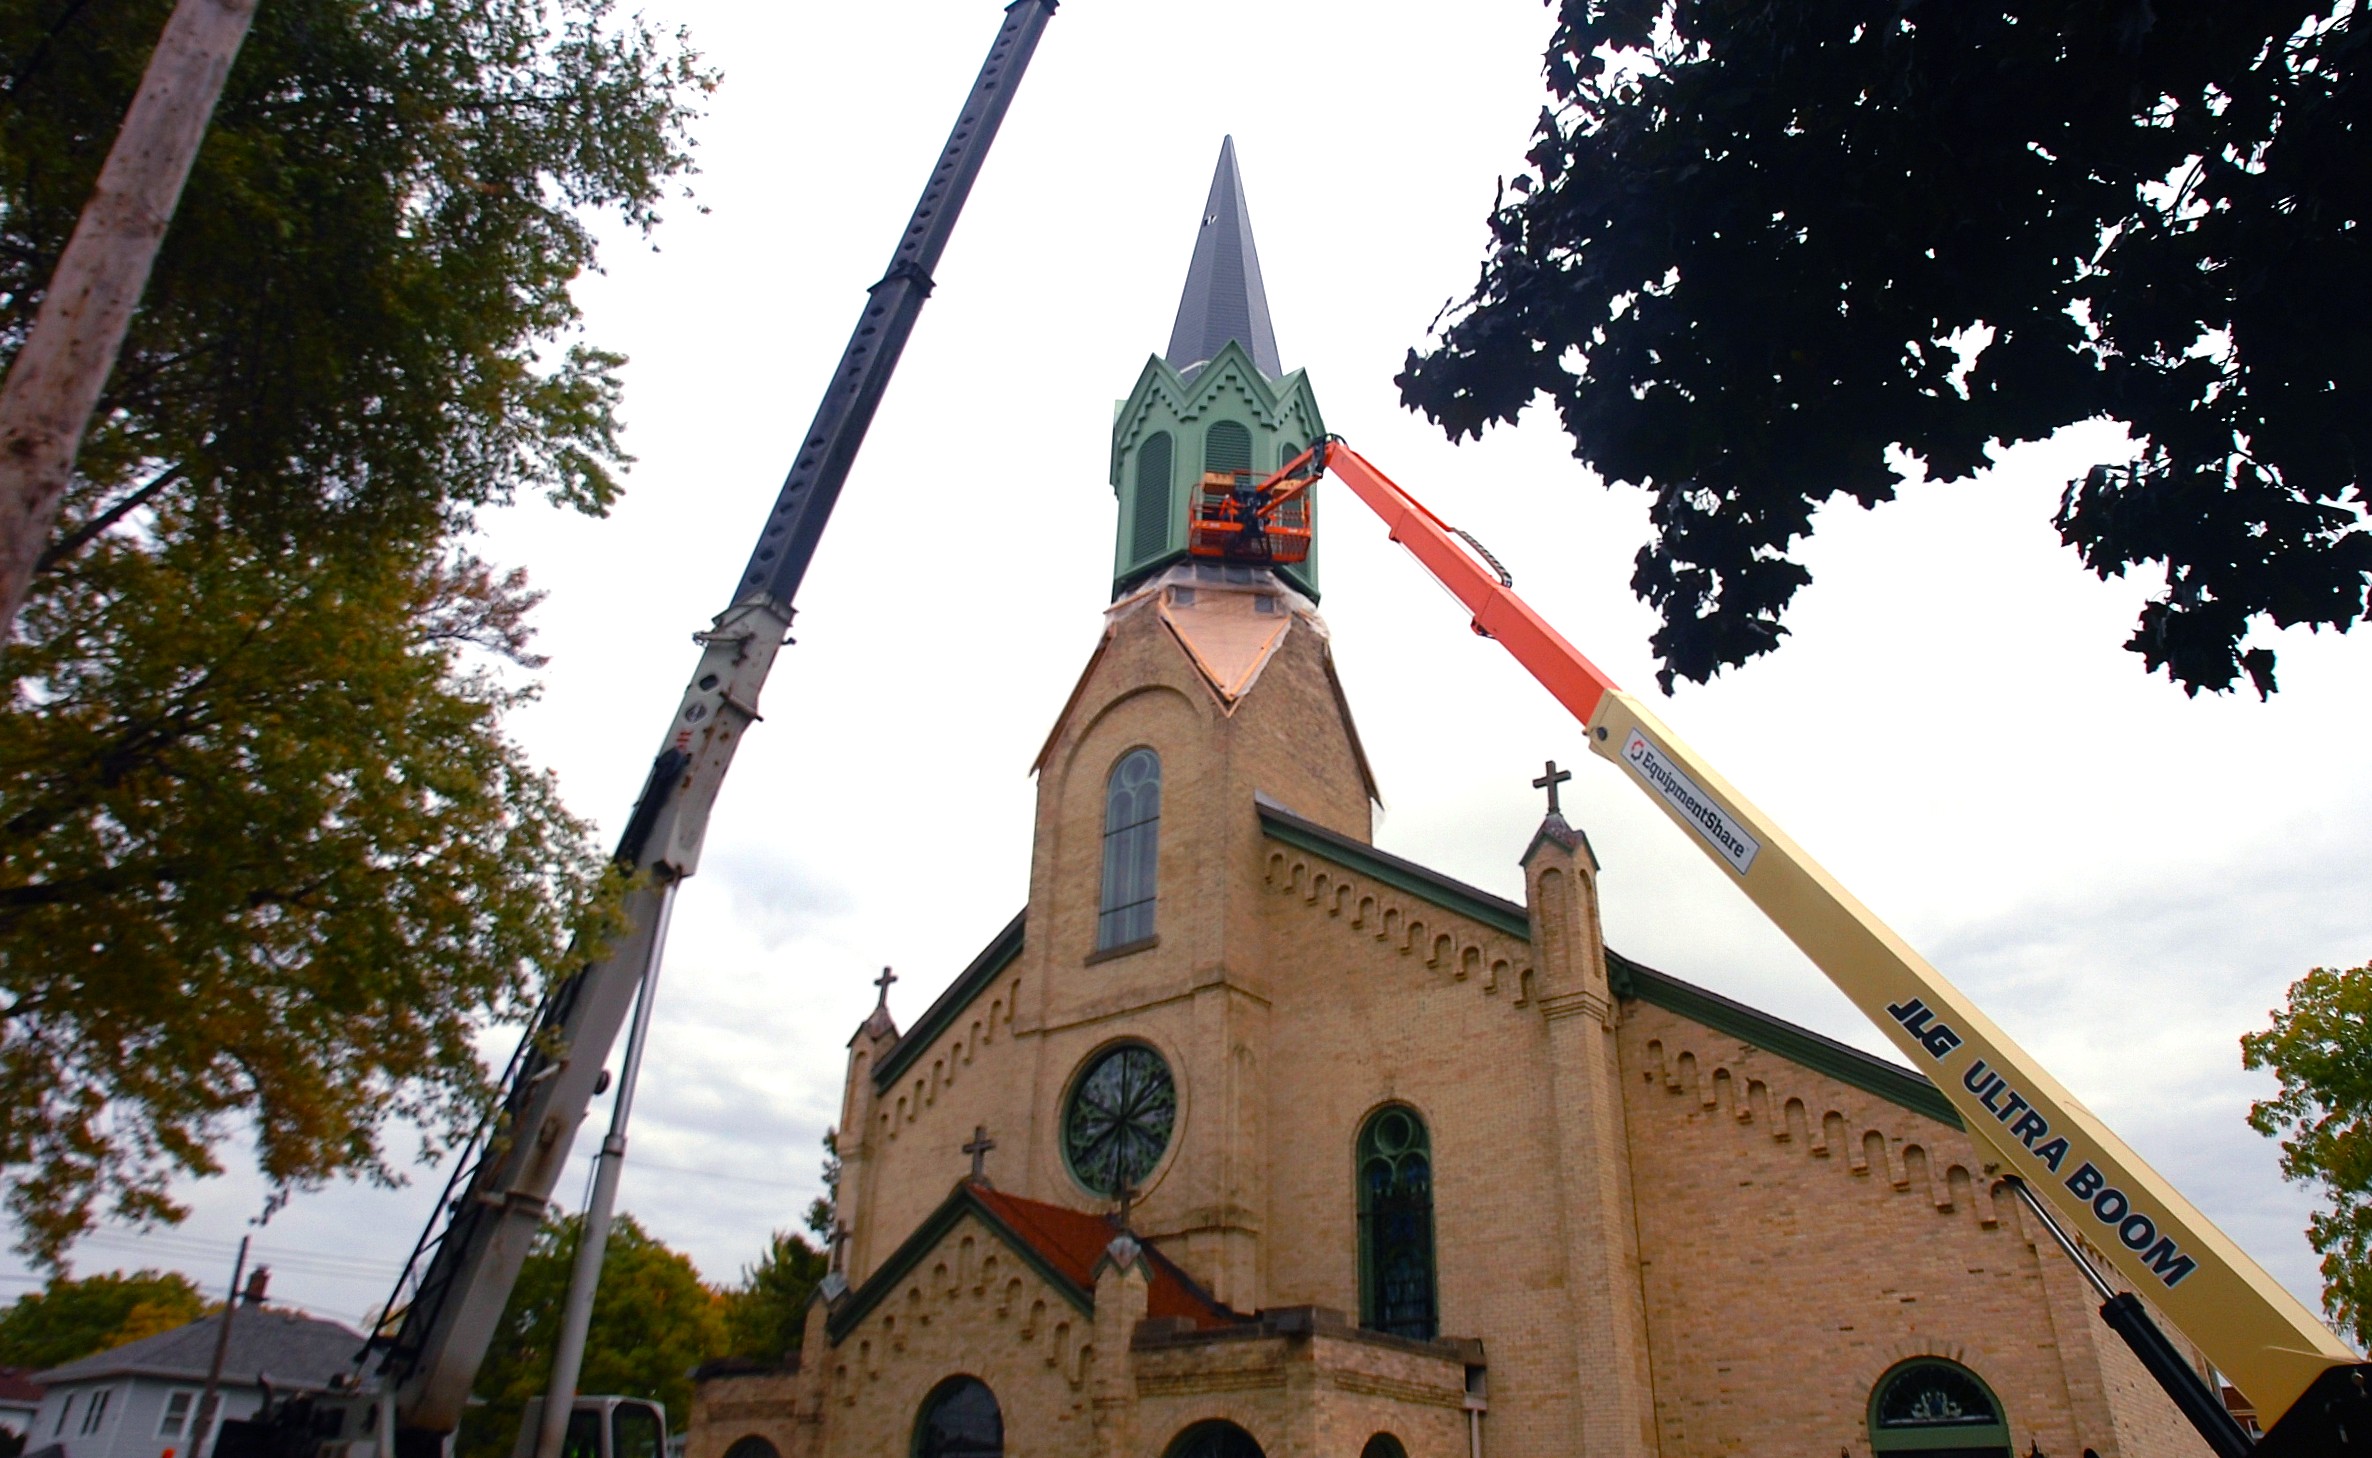 A new steeple was lifted in place over St. Patrick's Church in Janesville. JNR photo by Dan Plutchak